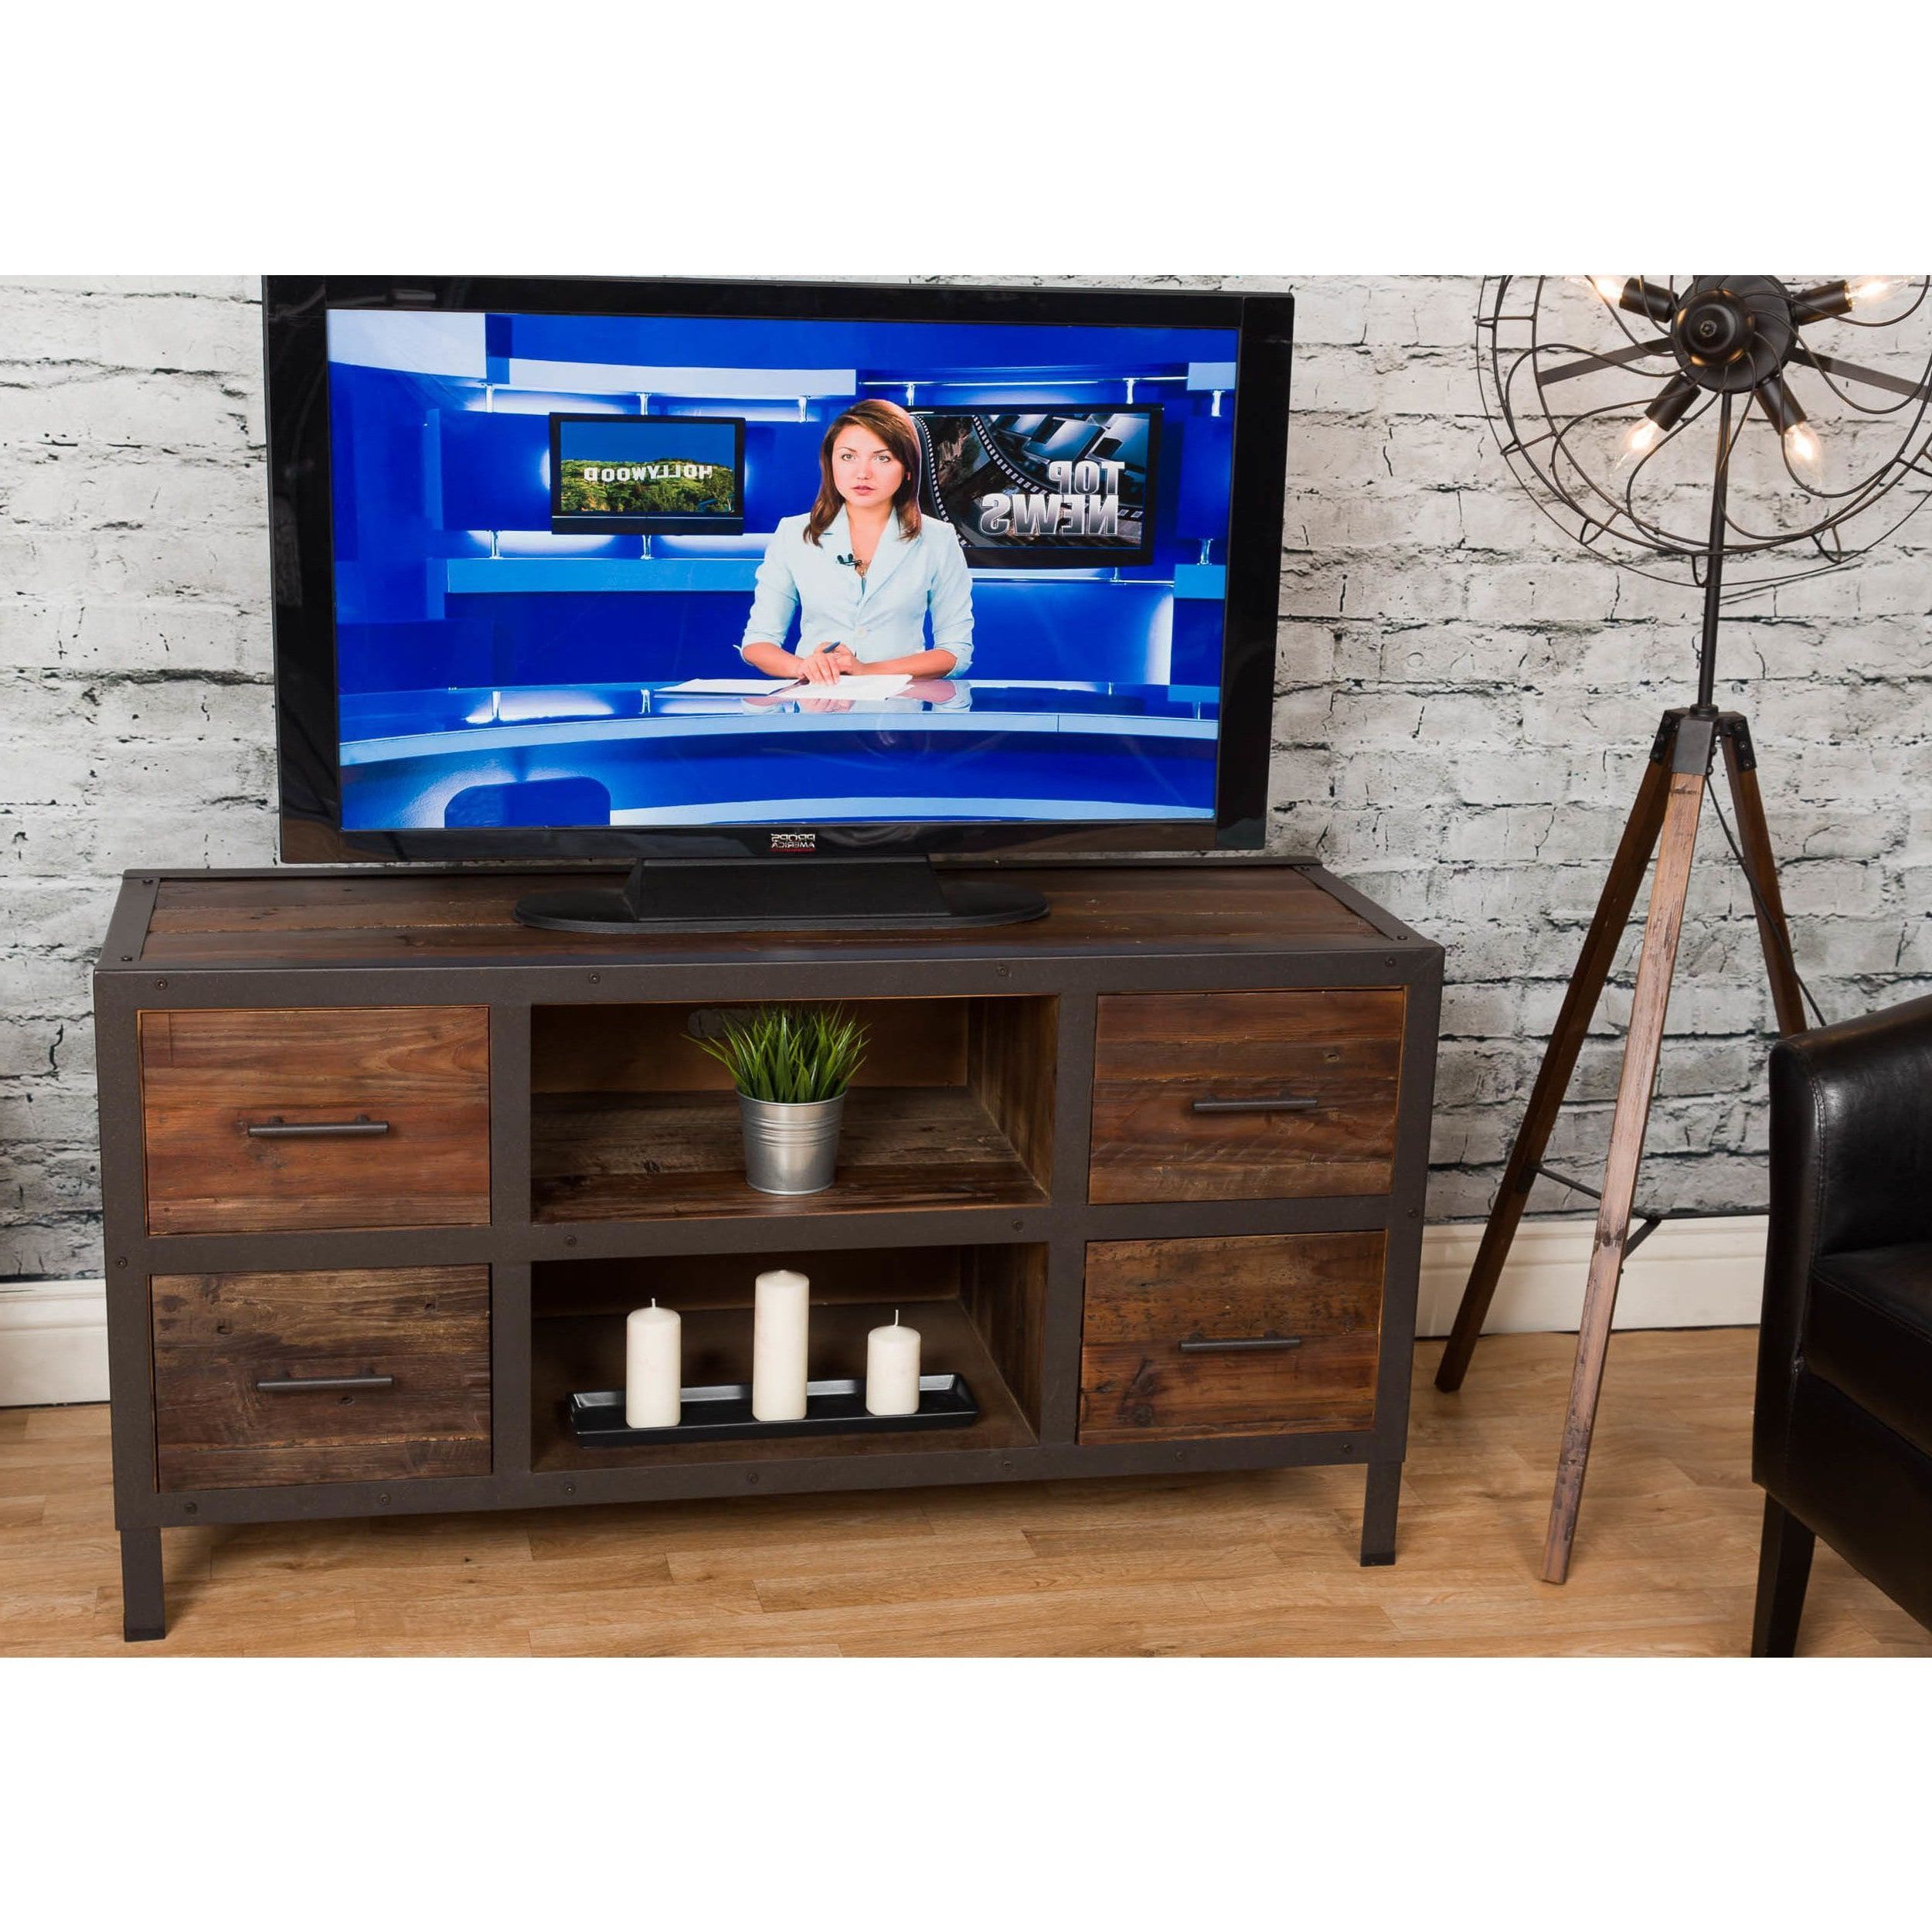 Online Shopping – Bedding, Furniture, Electronics, Jewelry Regarding Urban Rustic Tv Stands (Gallery 16 of 20)